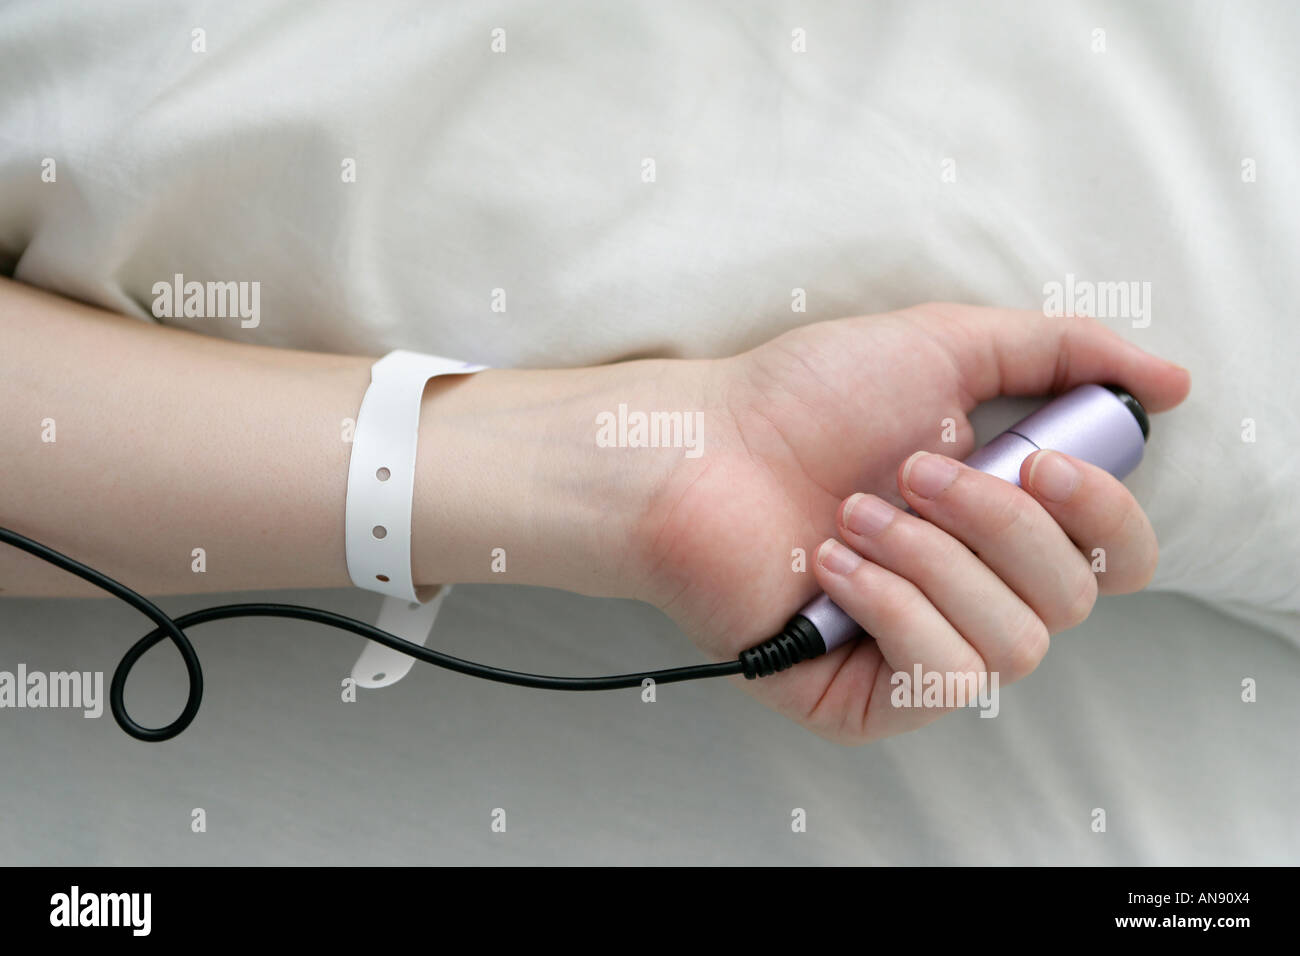 Woman using a tens machine in labour Stock Photo